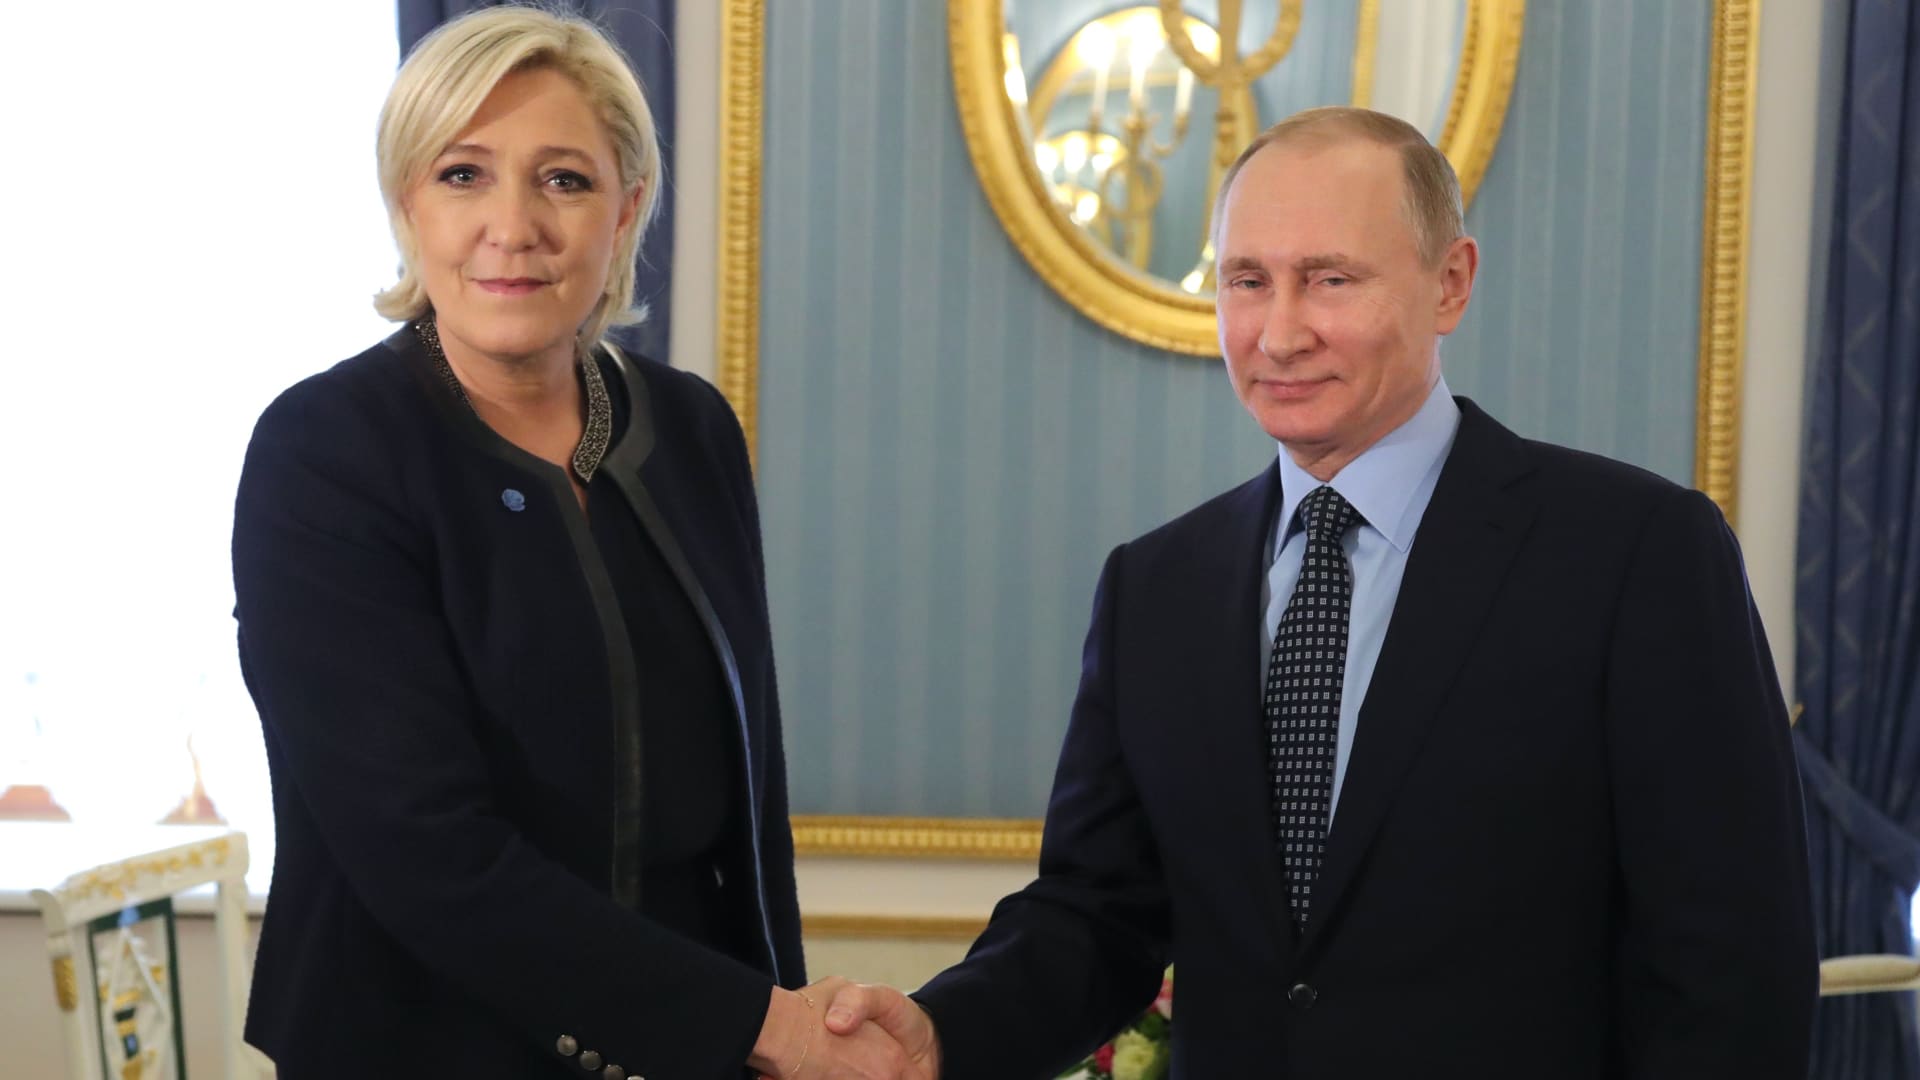 French presidential election candidate and far-right politician Marine Le Pen met with Russian President Vladimir Putin at the Kremlin in March of 2017, bolstering a relationship that has gained Le Pen much criticism.